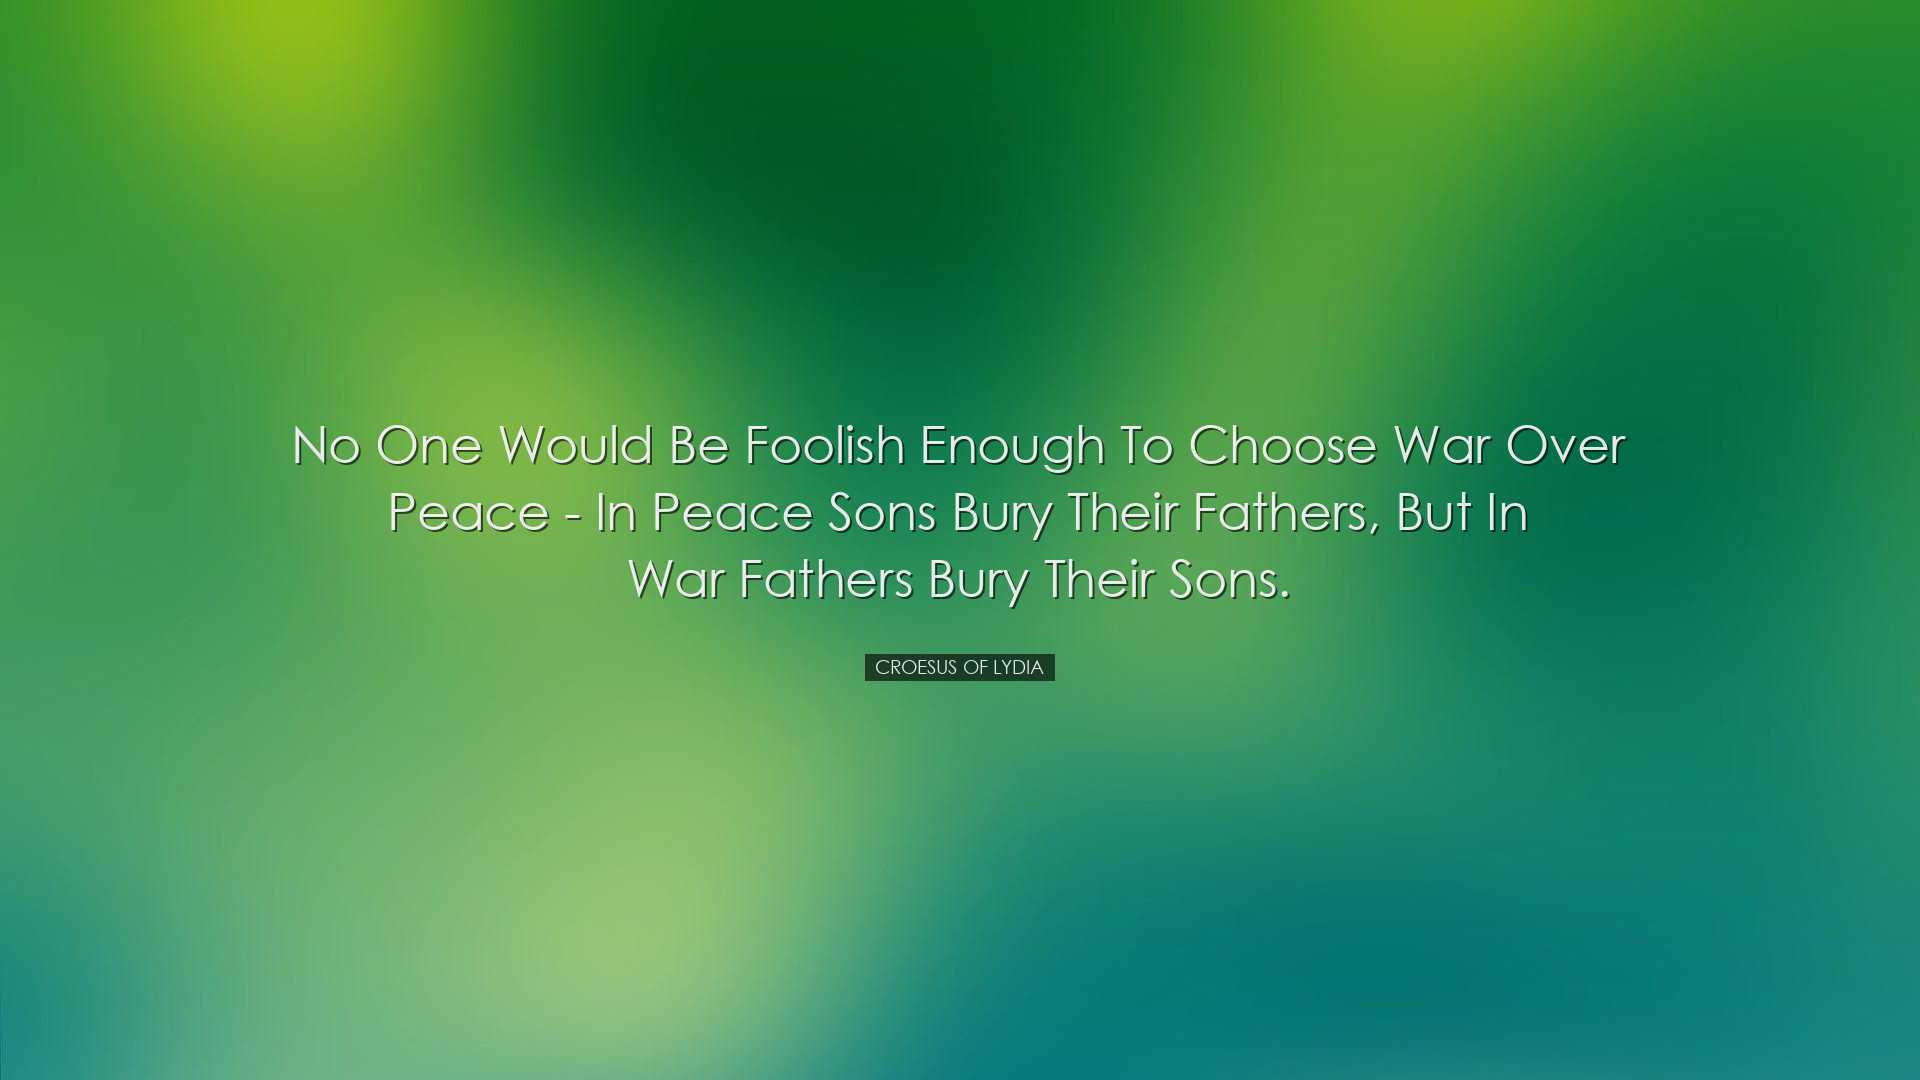 No one would be foolish enough to choose war over peace - in peace